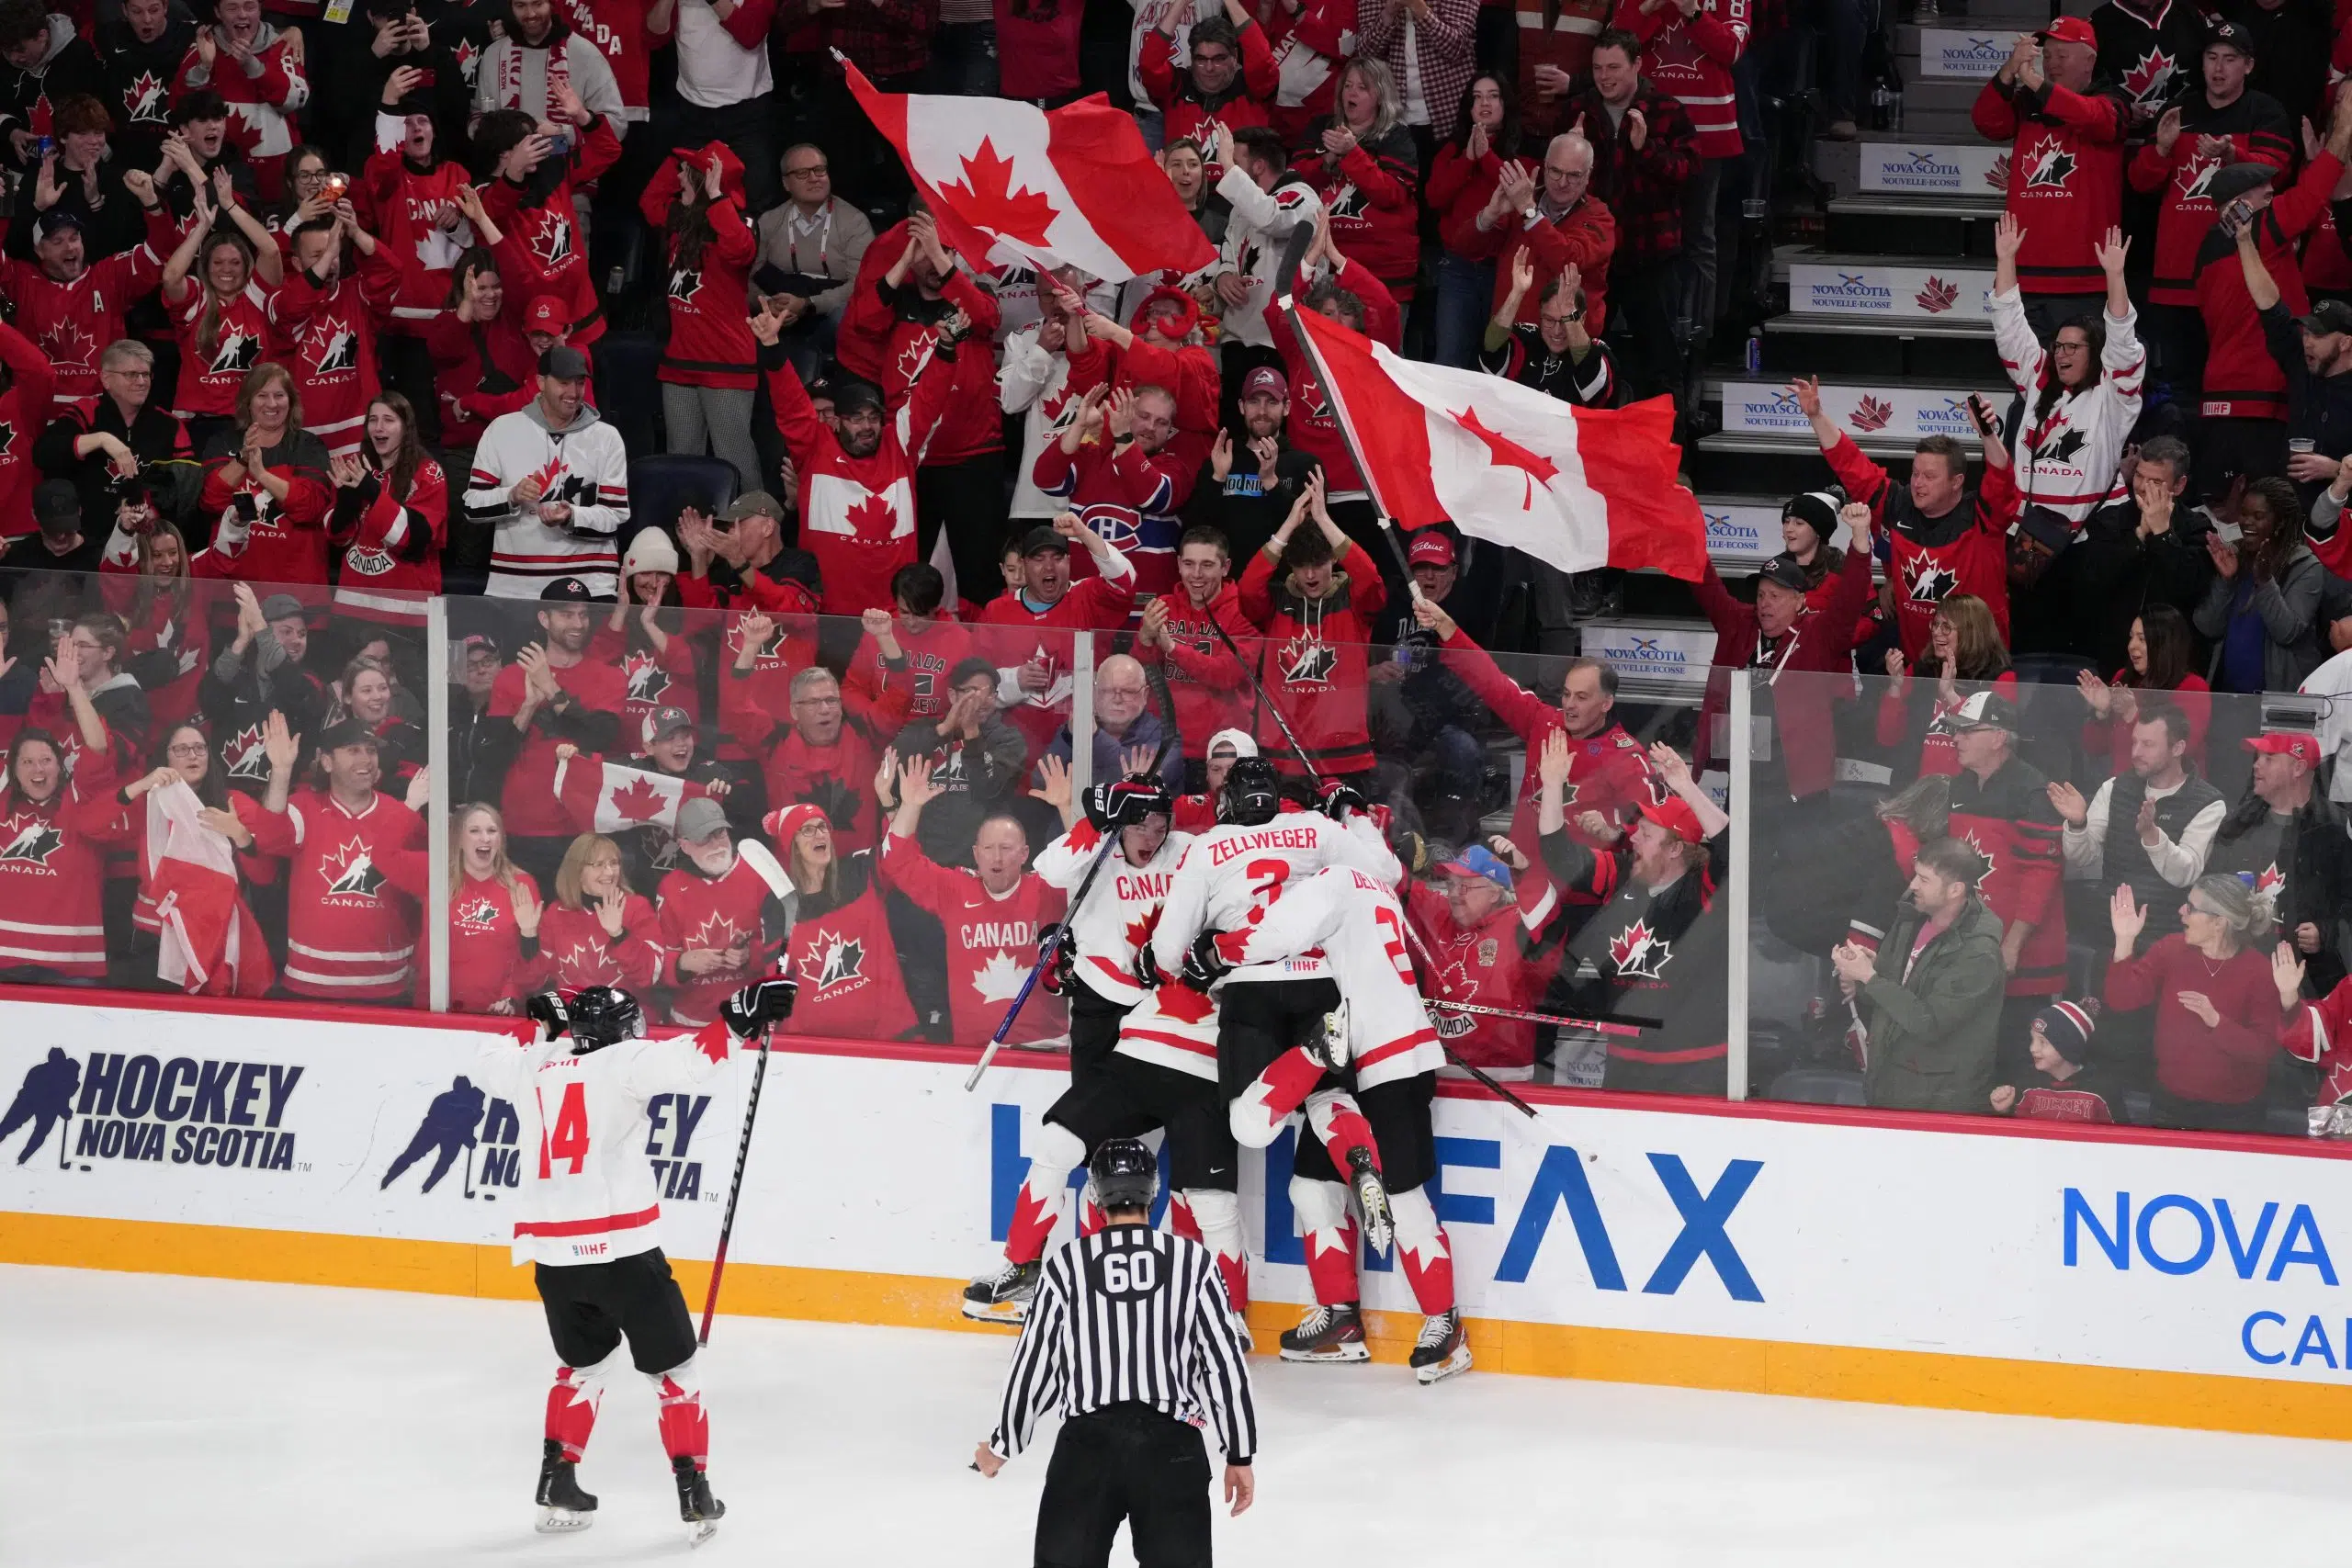 Going for gold: Canada beats U.S. to advance to fourth straight world junior final